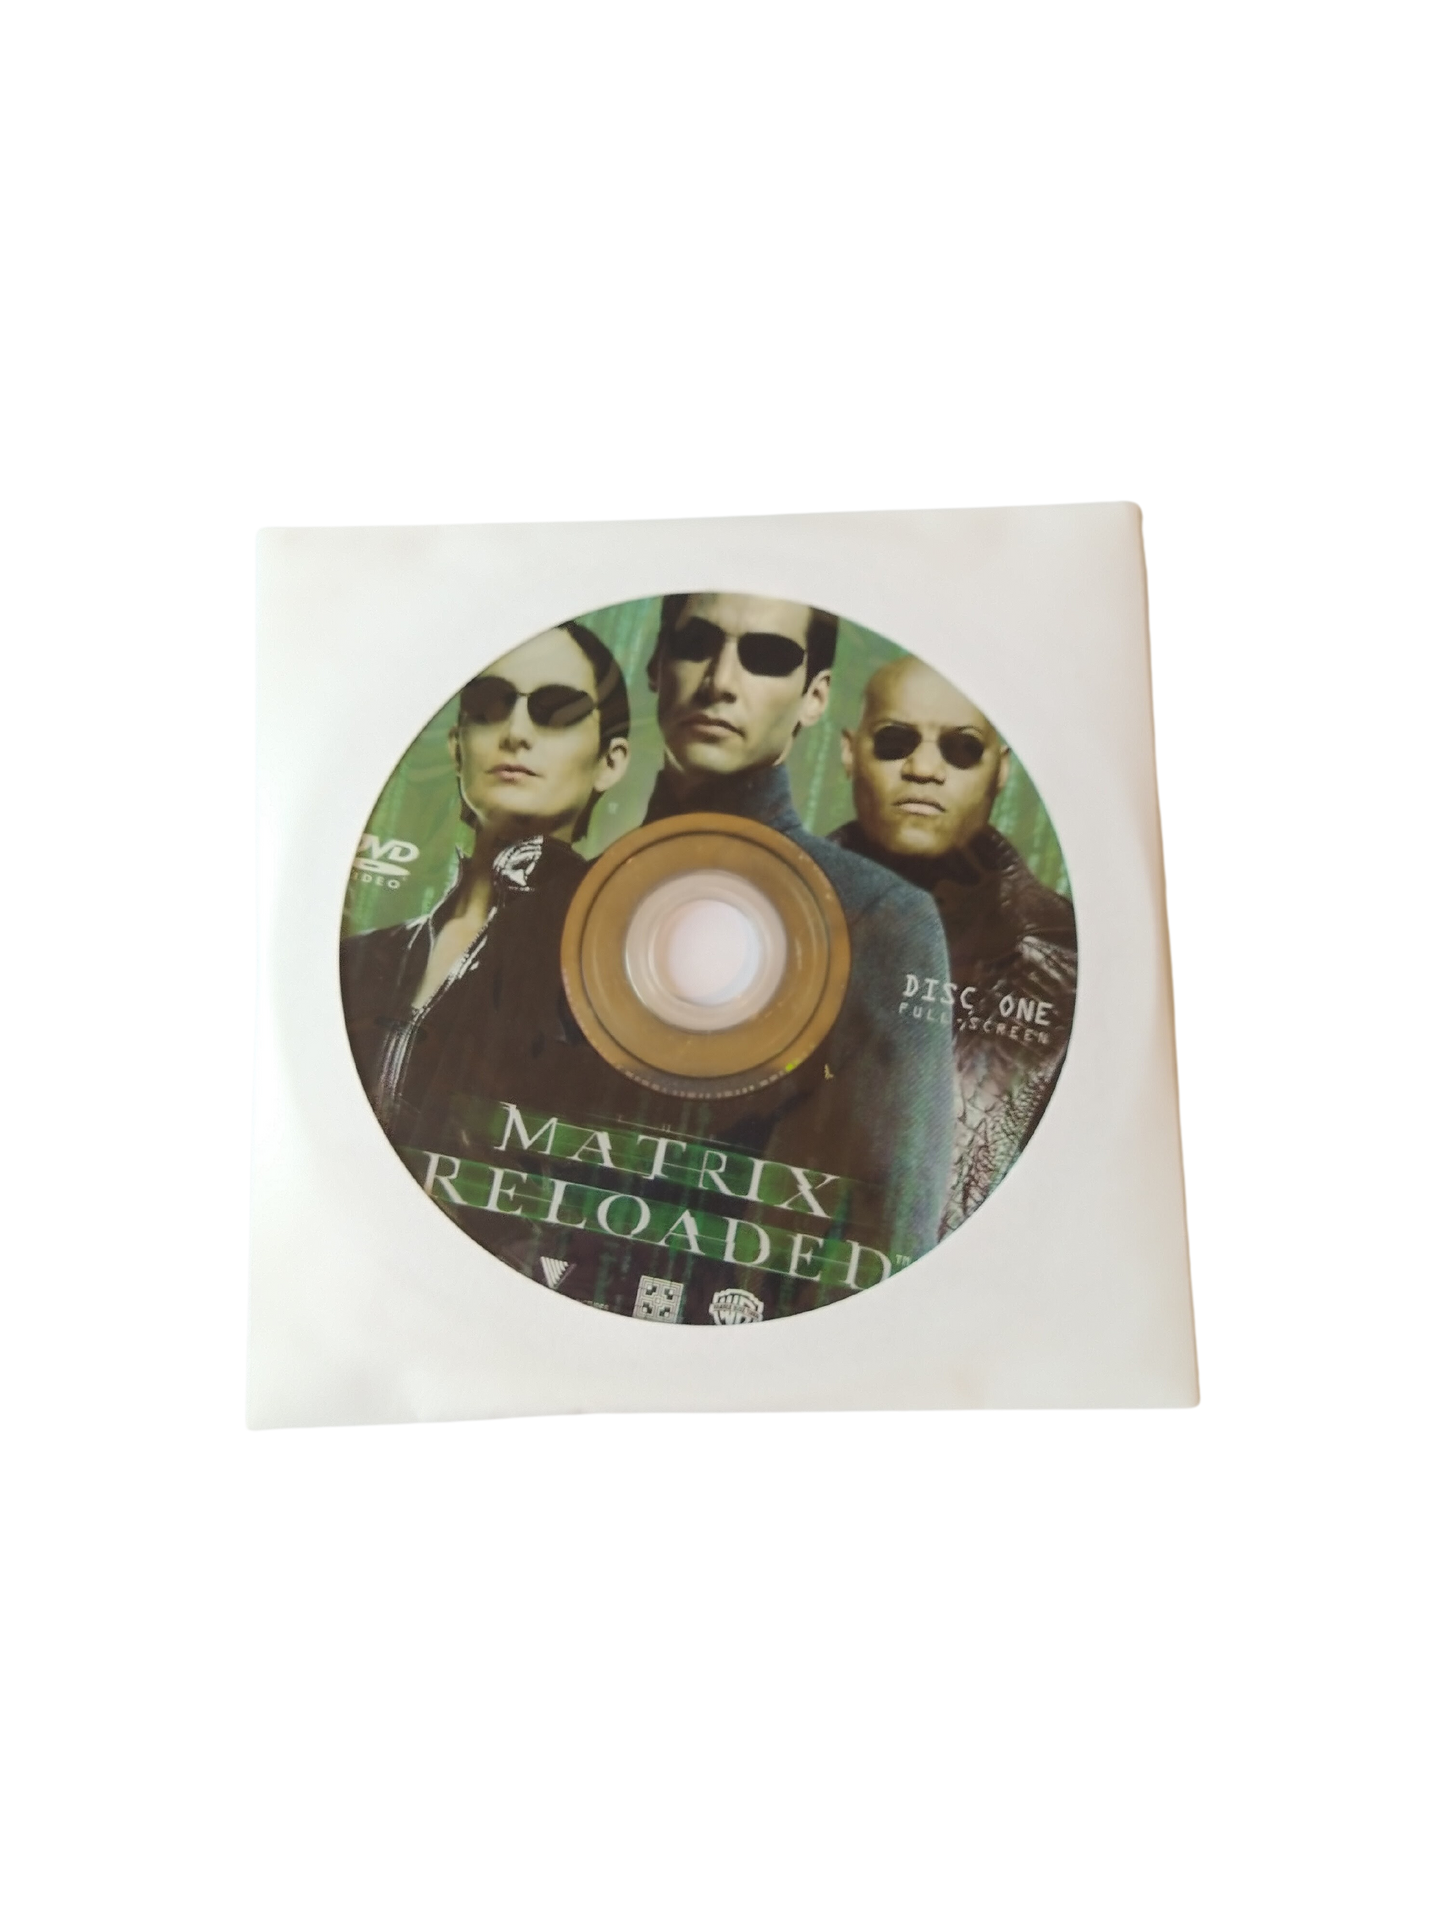 Matrix Reloaded - Discs Only(Both Discs Included)